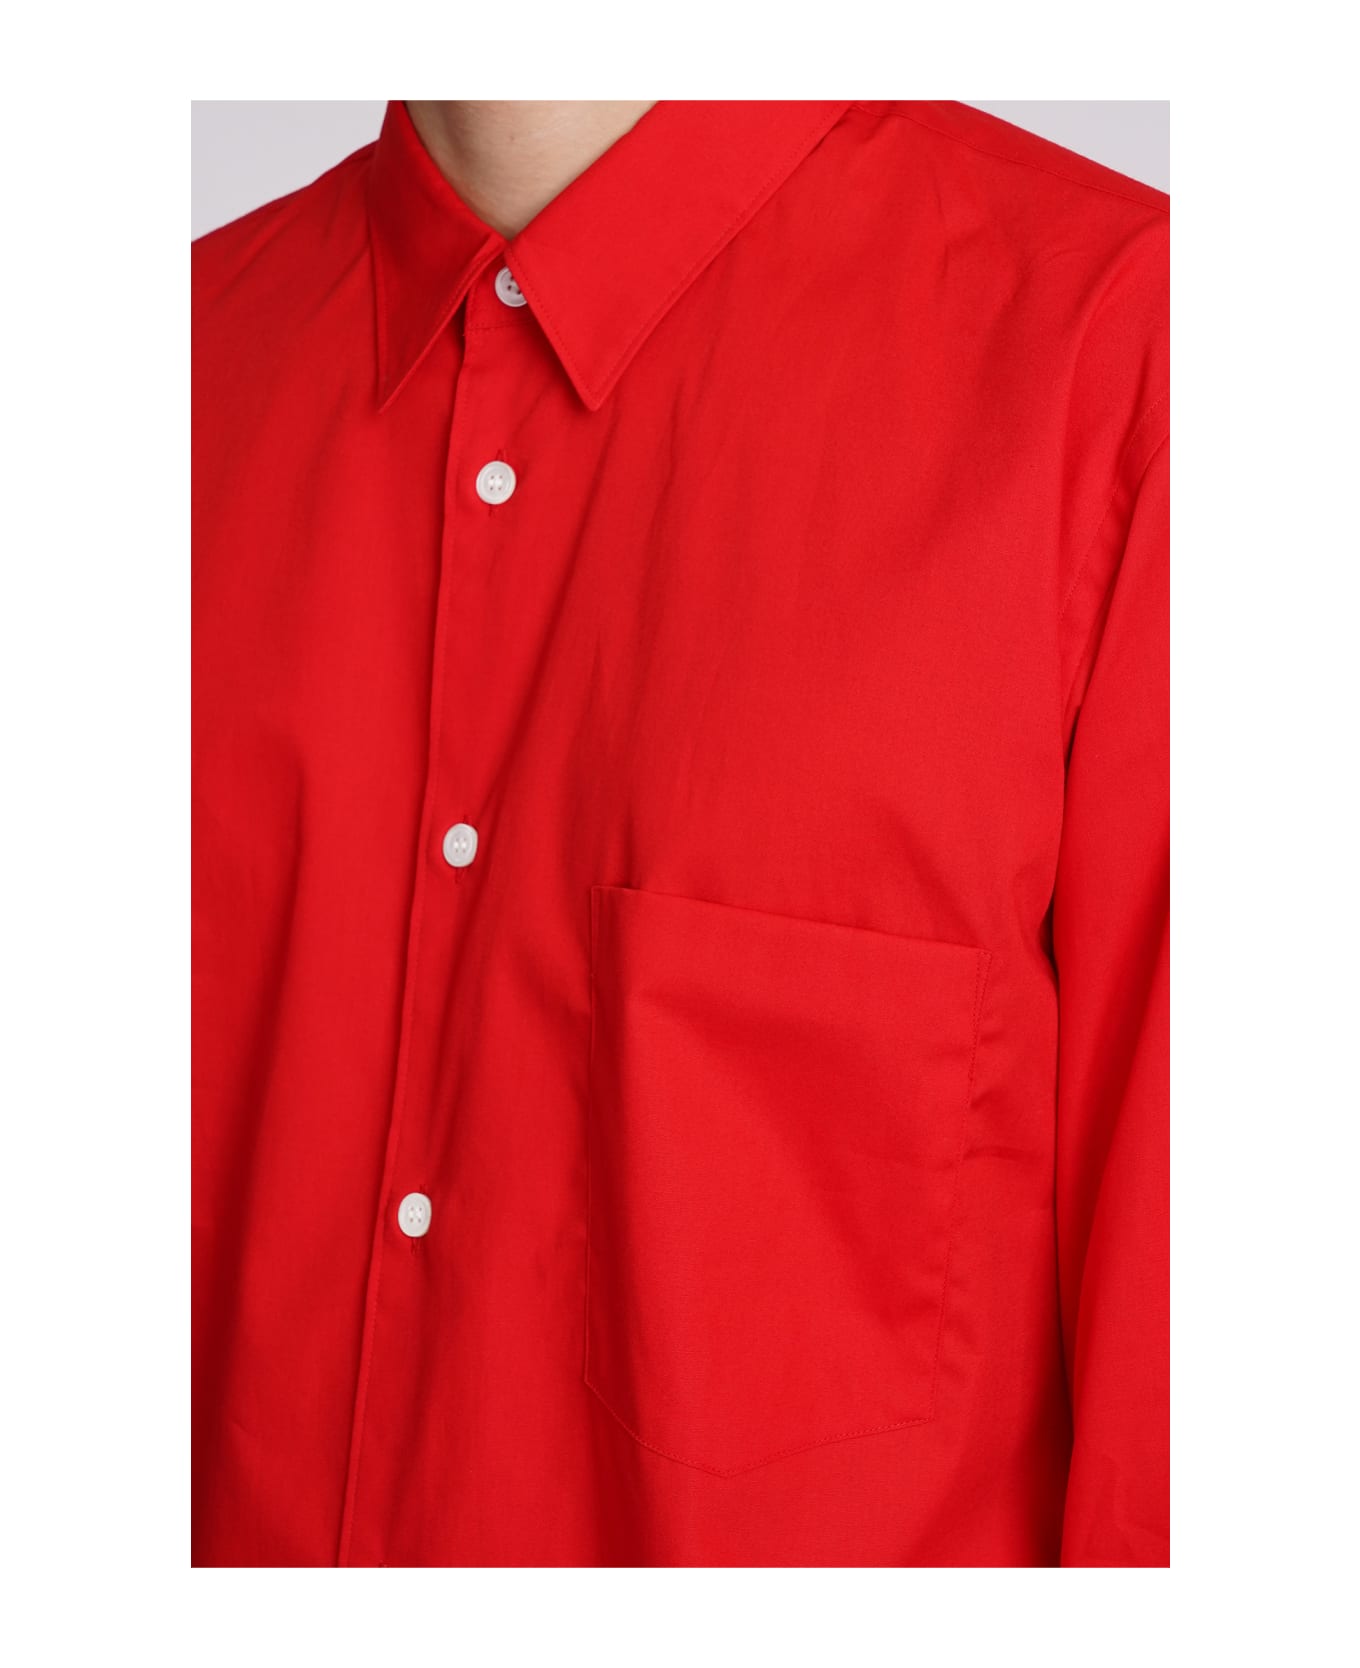 Comme Des Garçons Homme Plus Shirt In Red Cotton - red シャツ